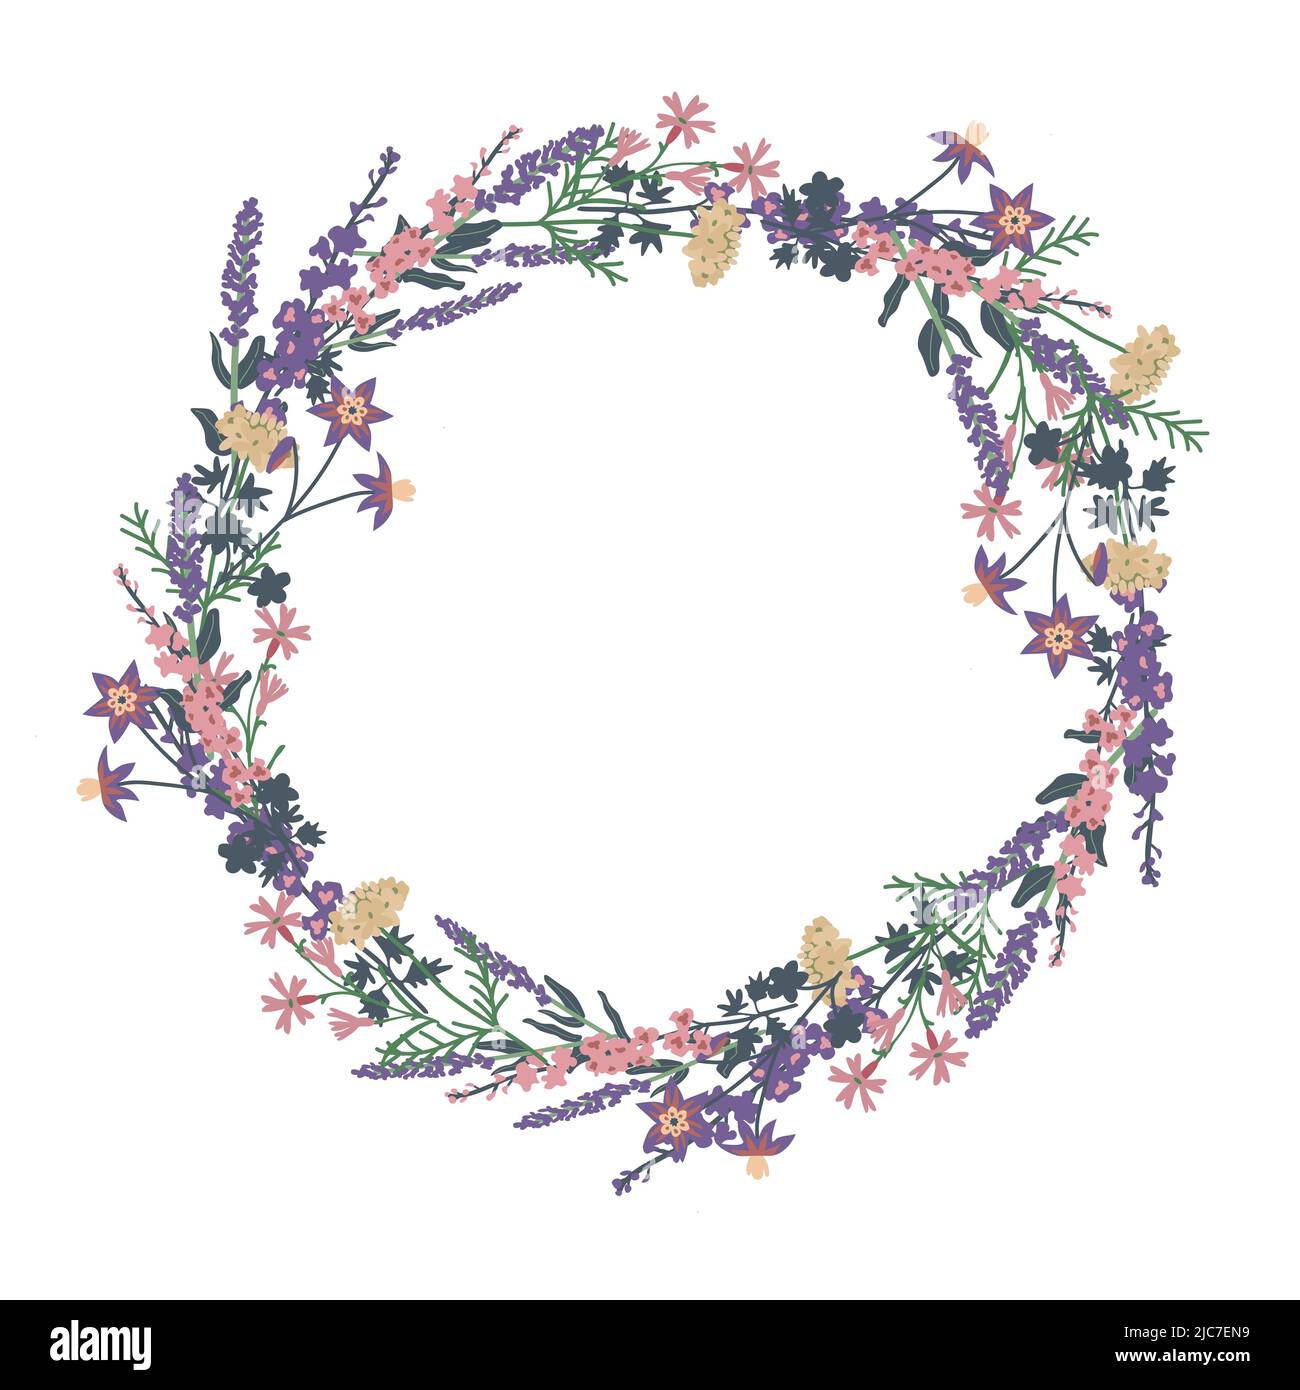 Decorative vector wreath with different flowers Stock Vector